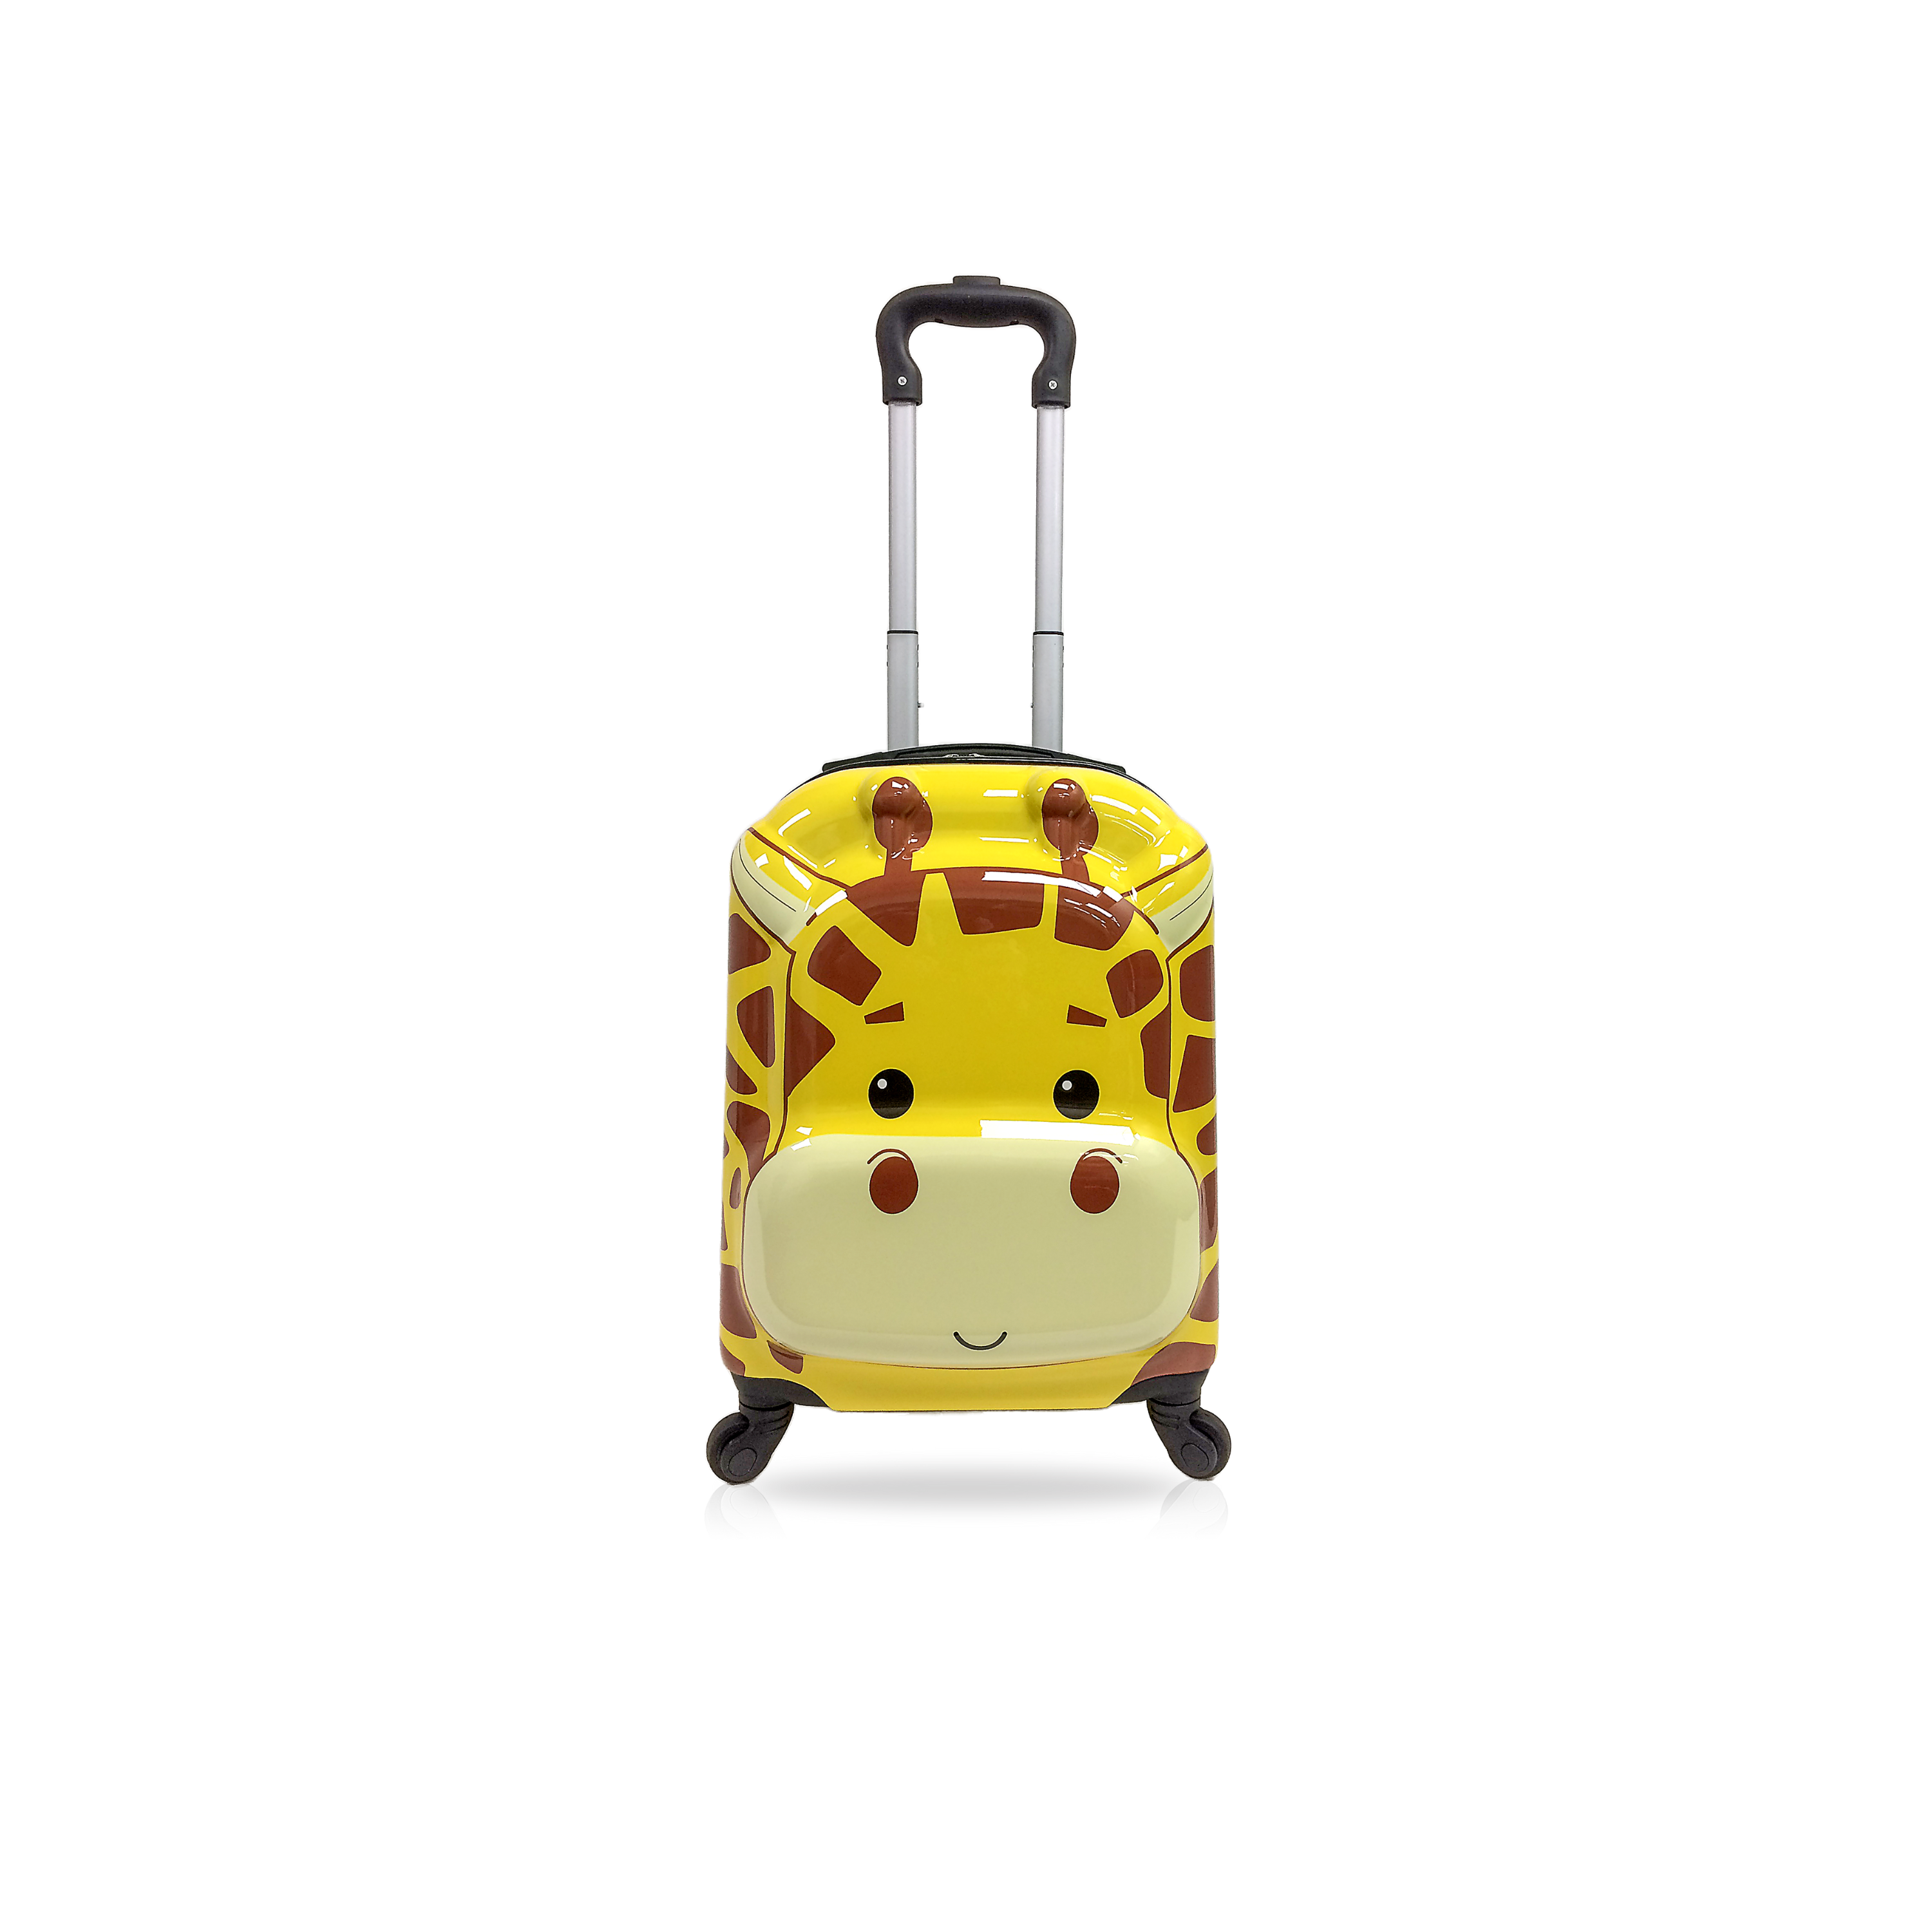 TUCCI Italy GAFFIE GIRAFFE 18" Kids Luggage Suitcase